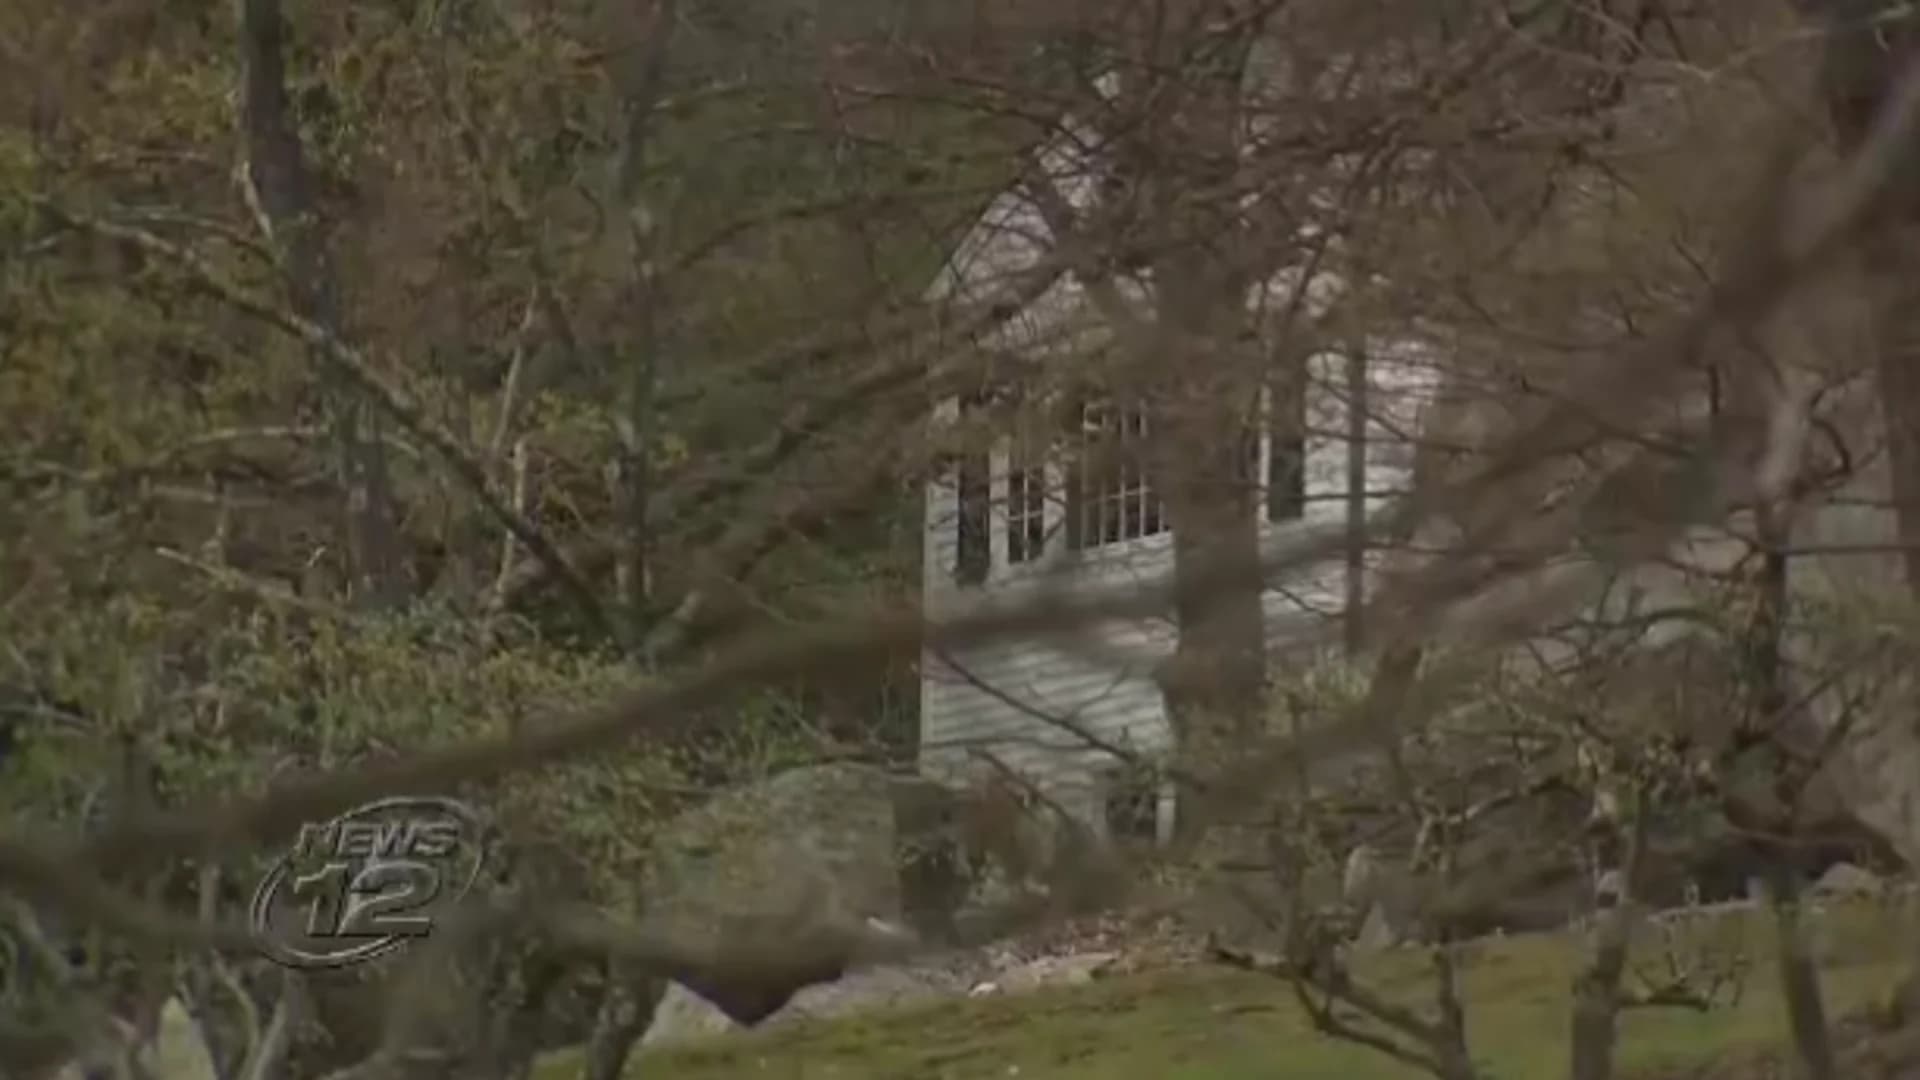 Police: 2-year-old drowns in Chappaqua